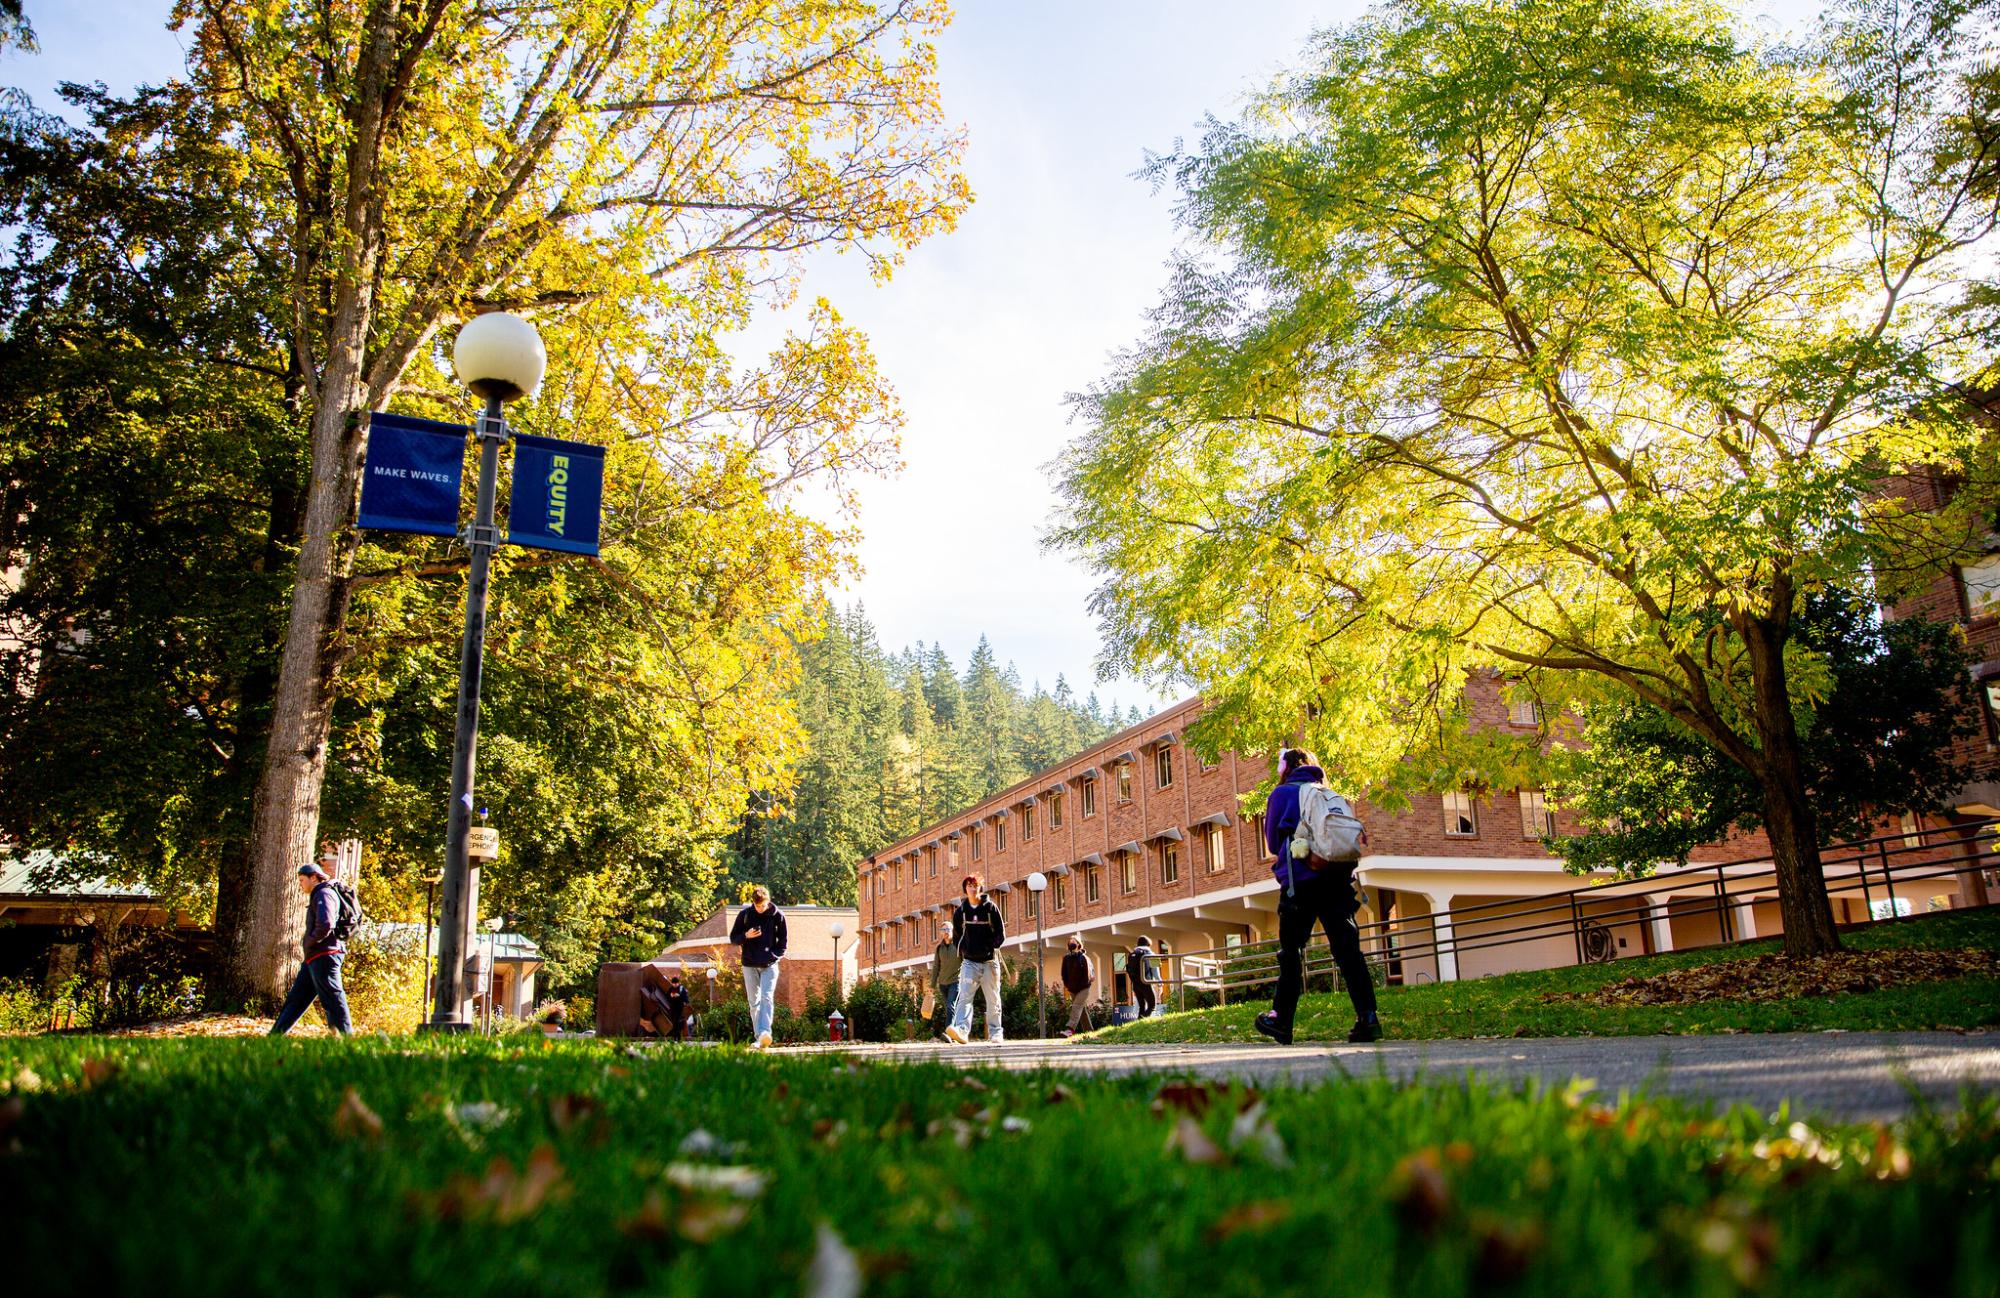 WWU Campus with red brick building, lawn, and trees